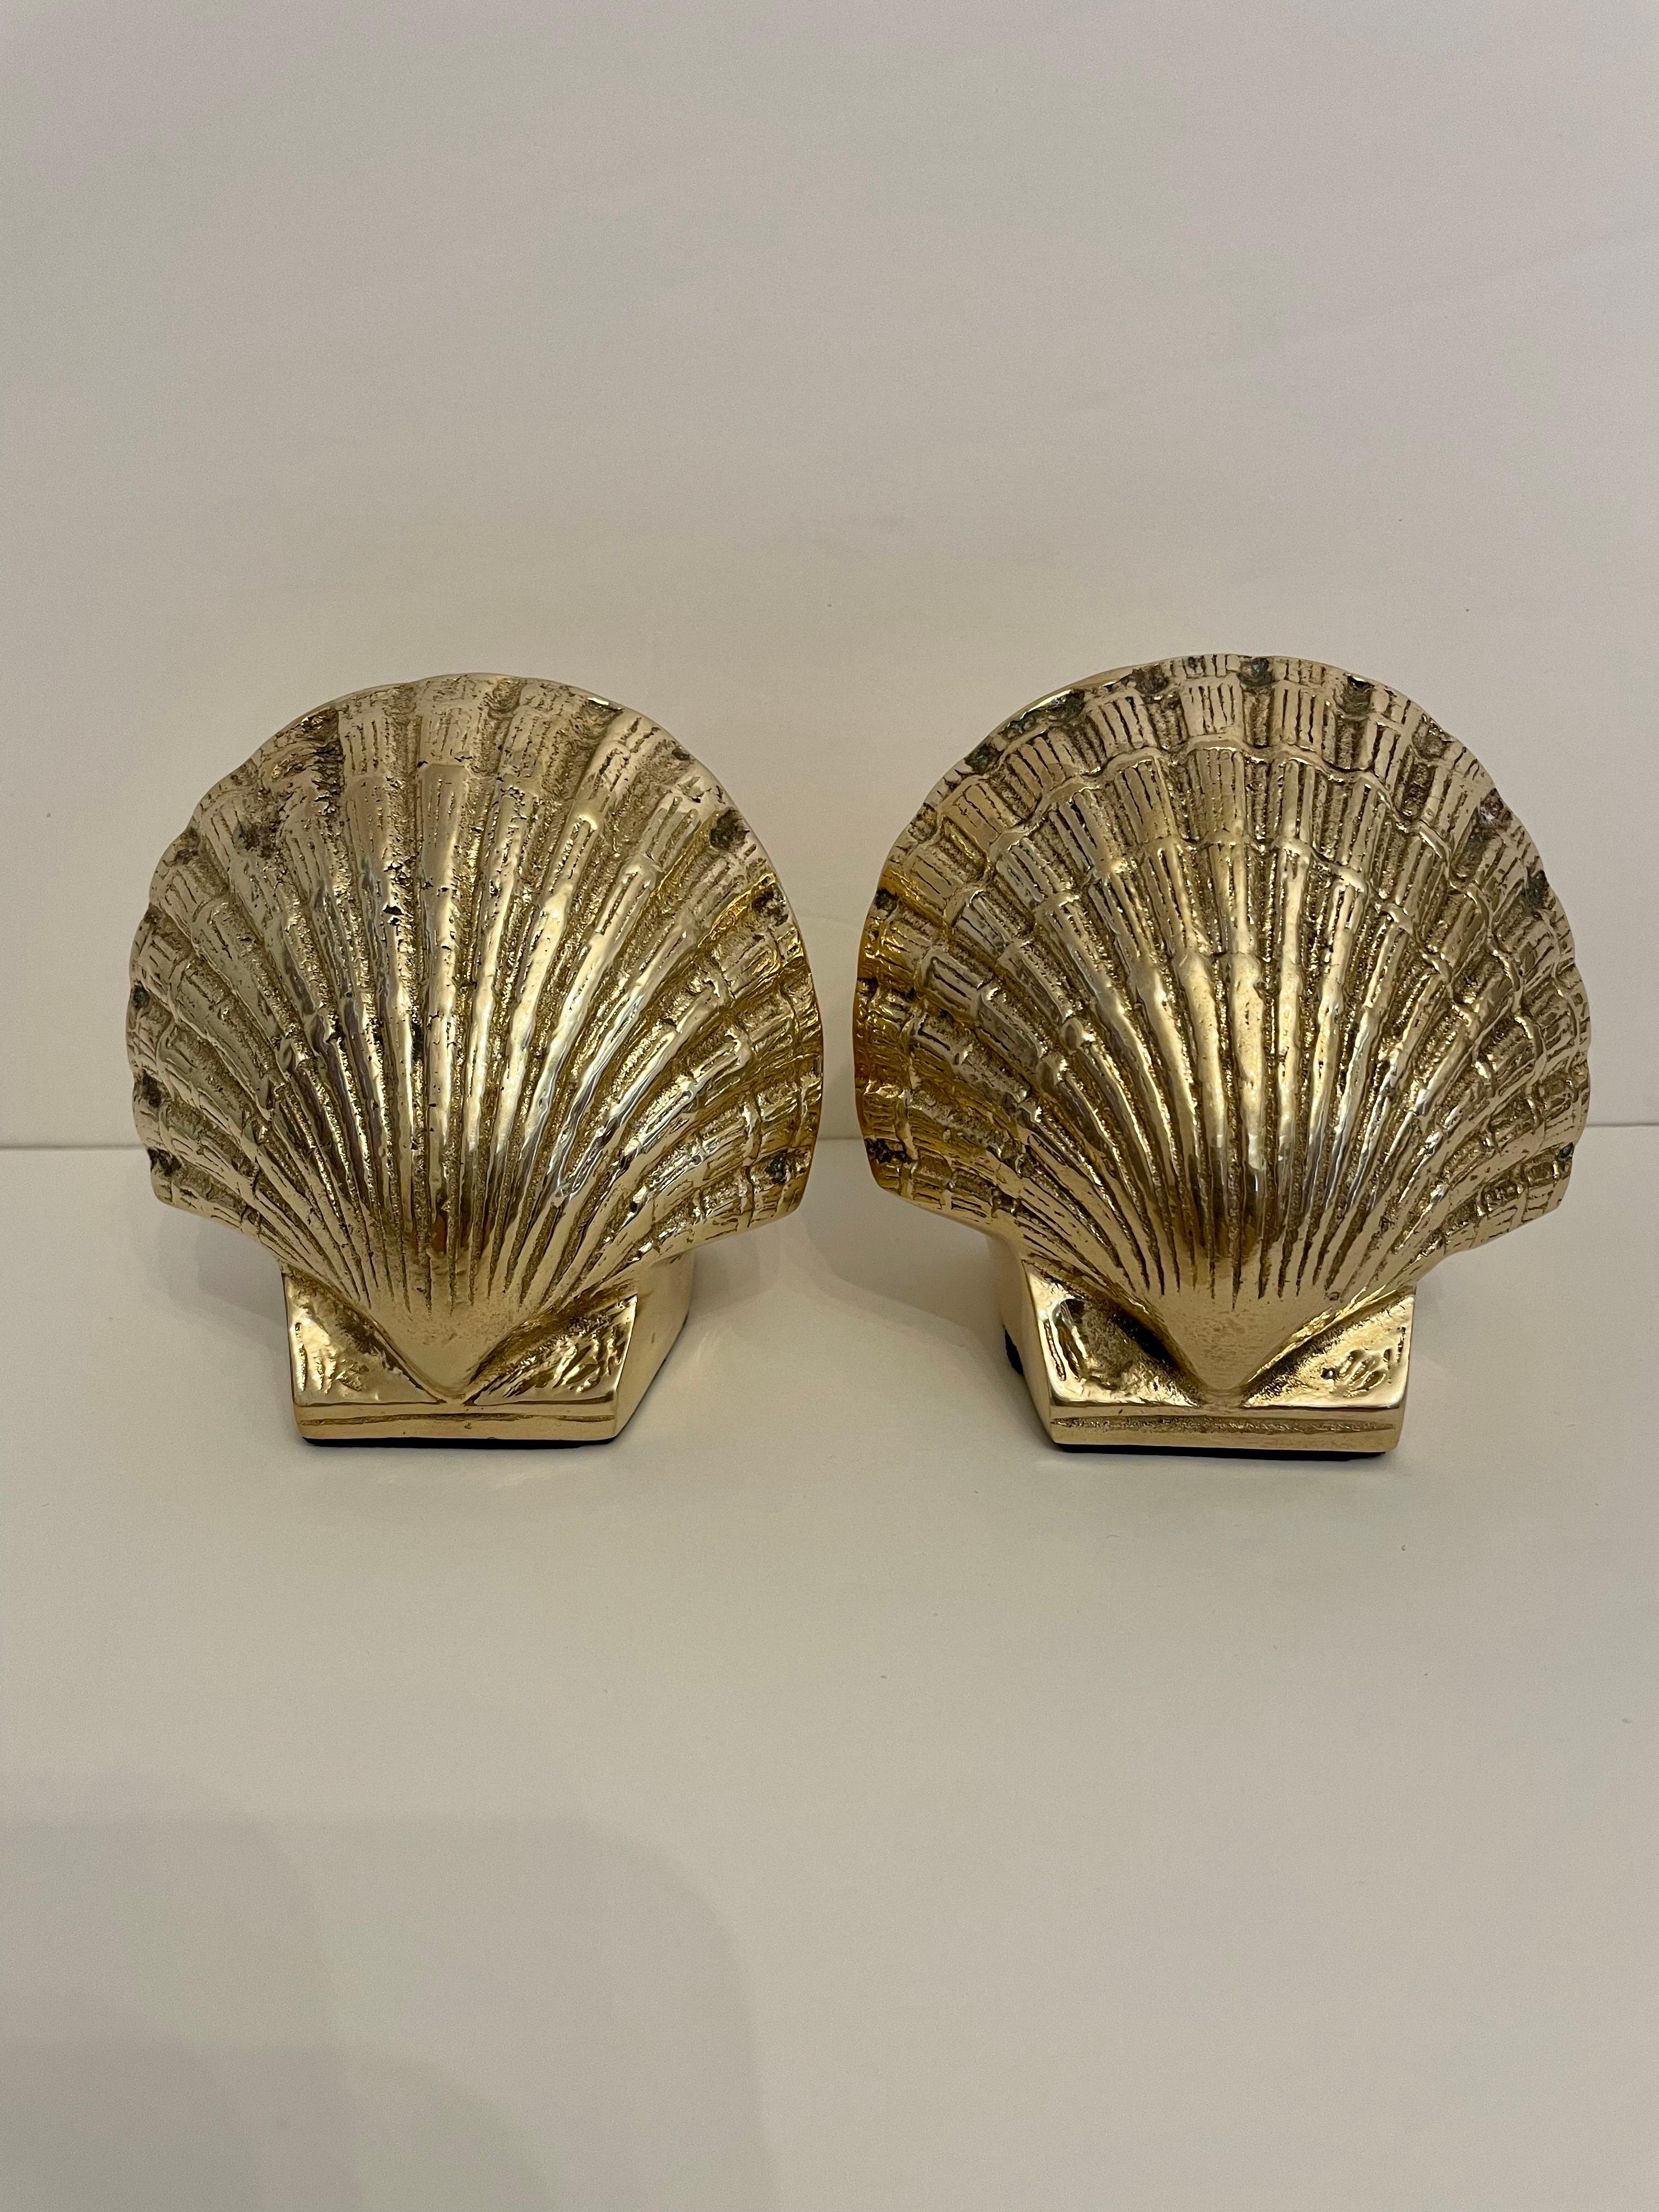 Pair brass clam shell seashell bookends. Very good detail to the casting. Good condition. Any dark spots are reflection only. Felt on bottom. Hand Polished, ready to use.